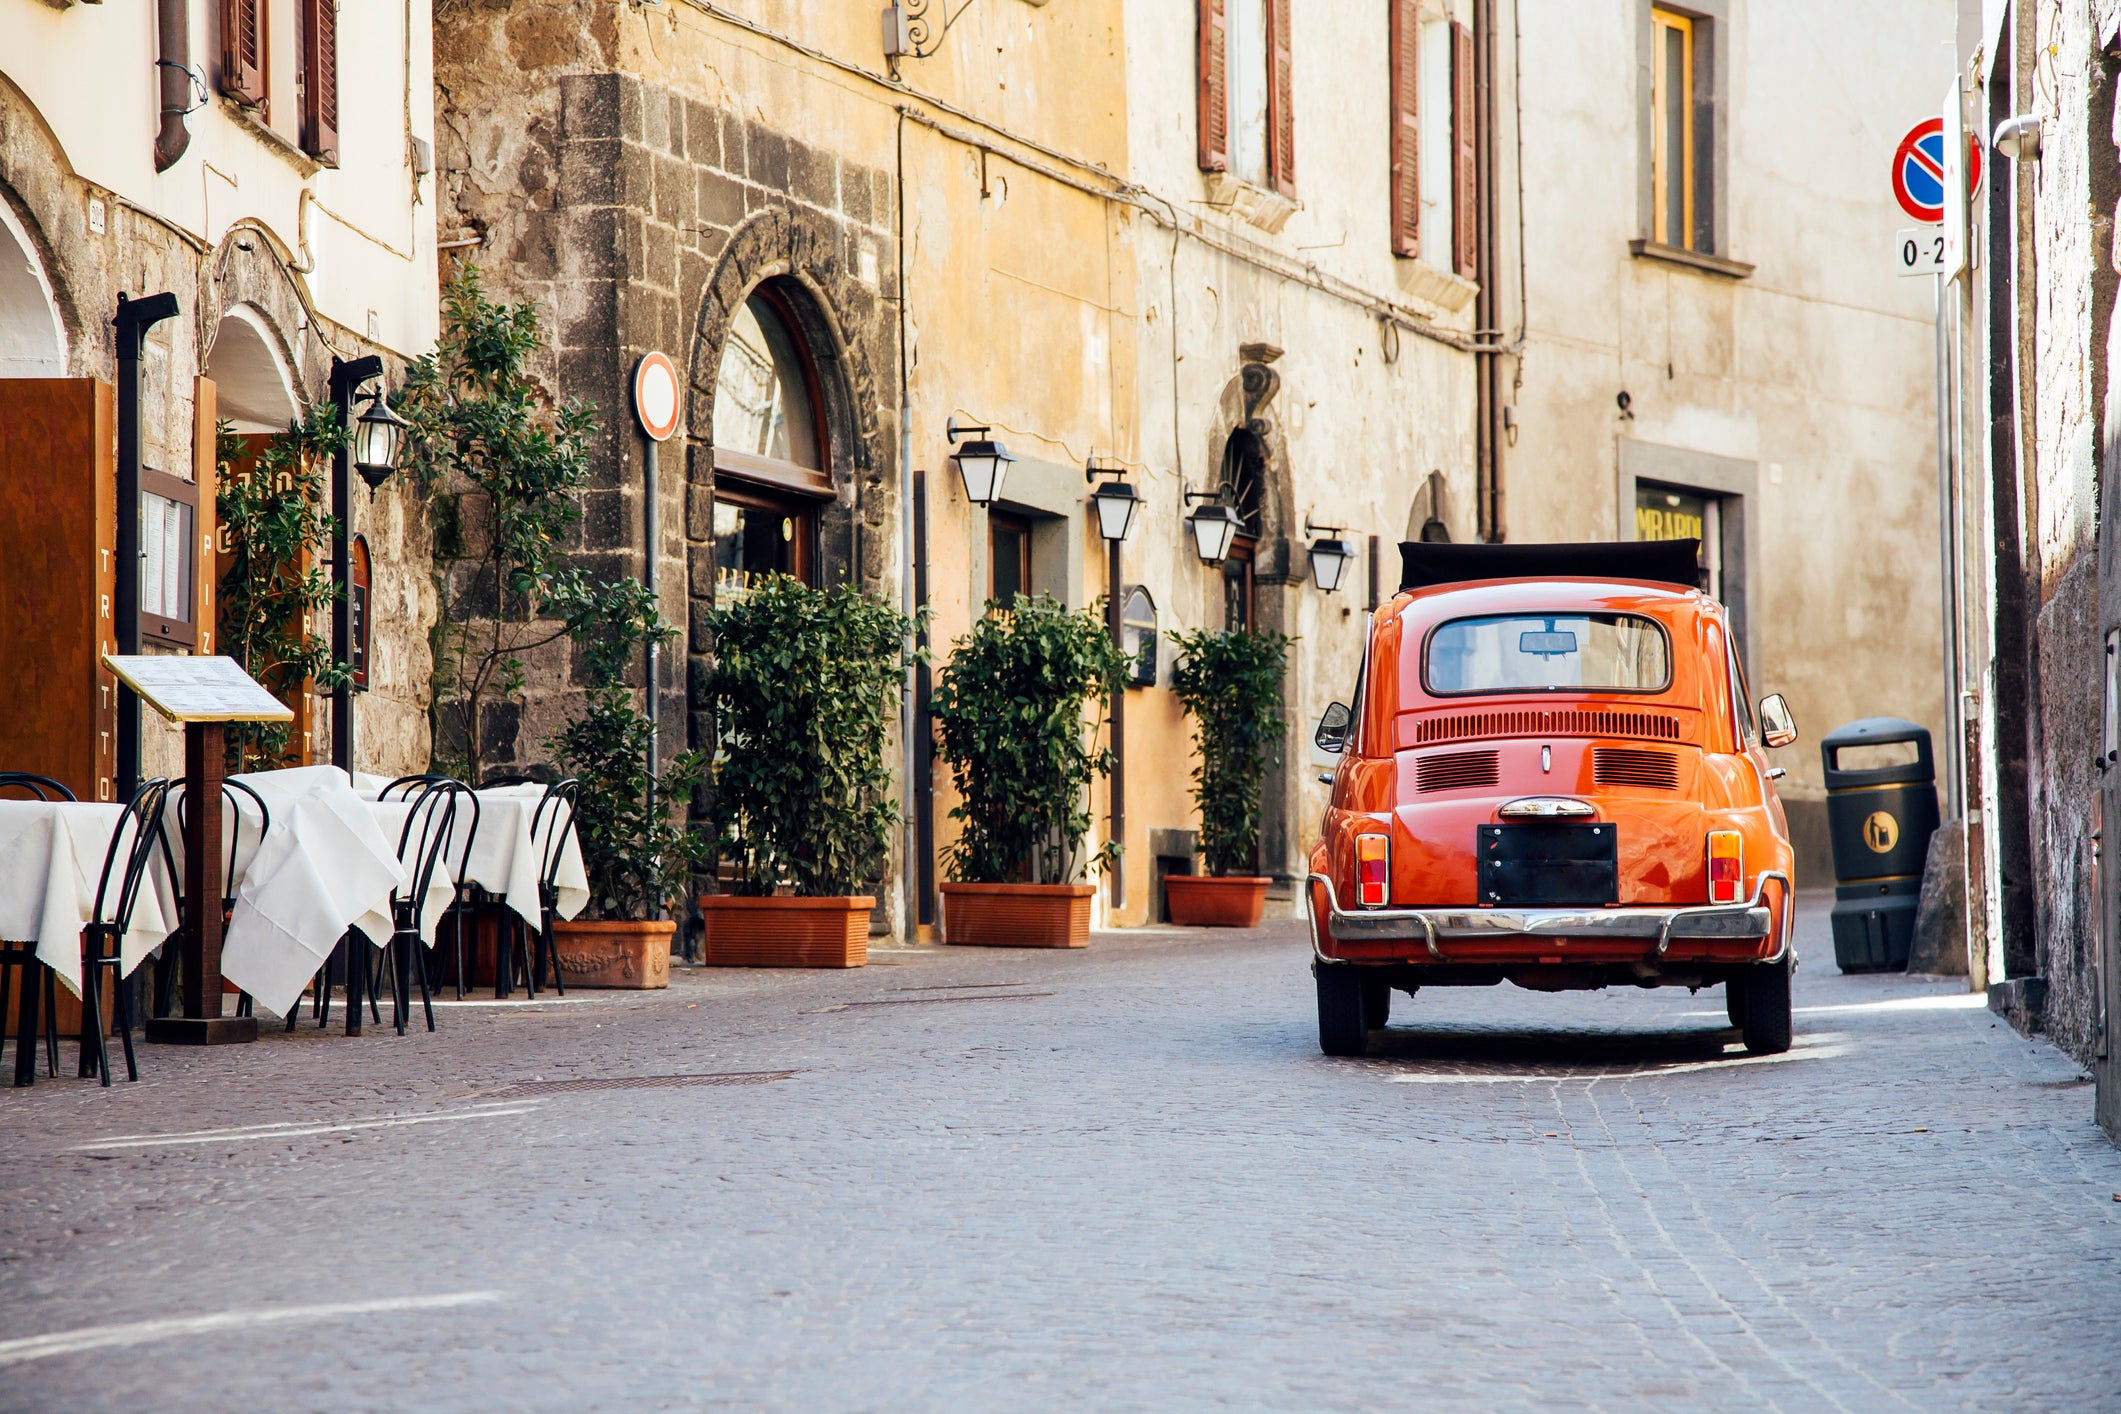 Old red vintage car on the narrow street in Italy